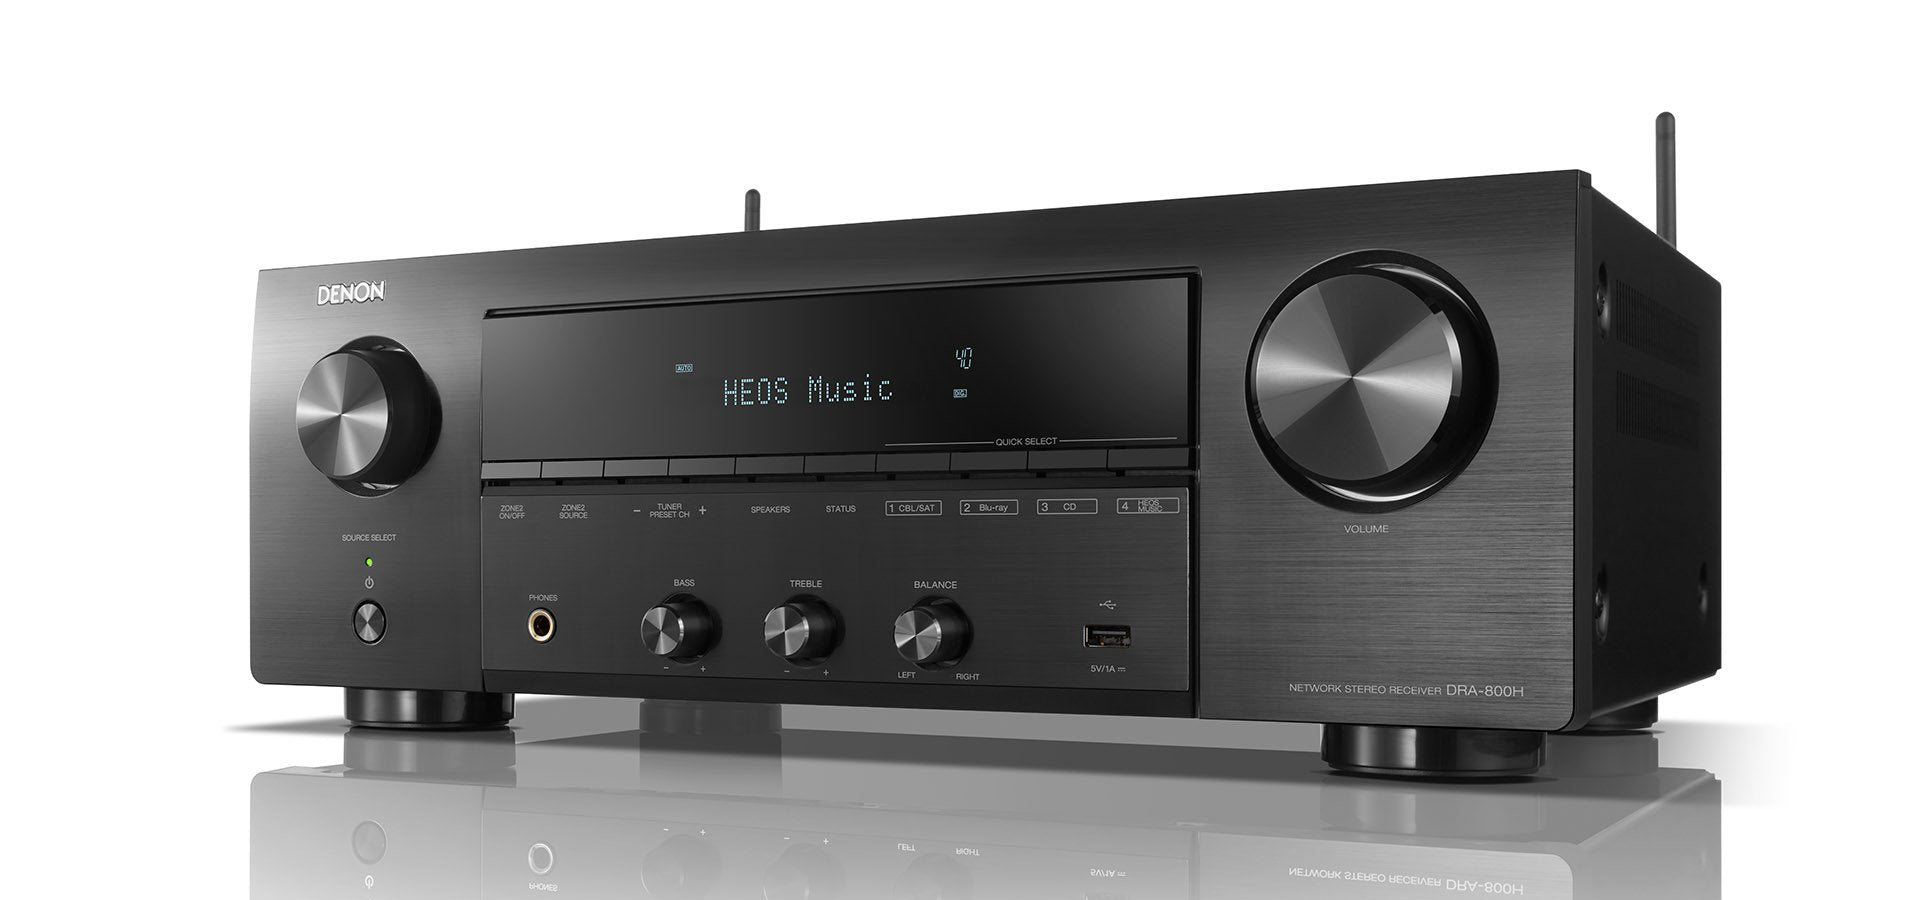 Denon DRA-800H 2ch Hi-Fi Network Receiver with HEOS Built-in - Fine Fidelity